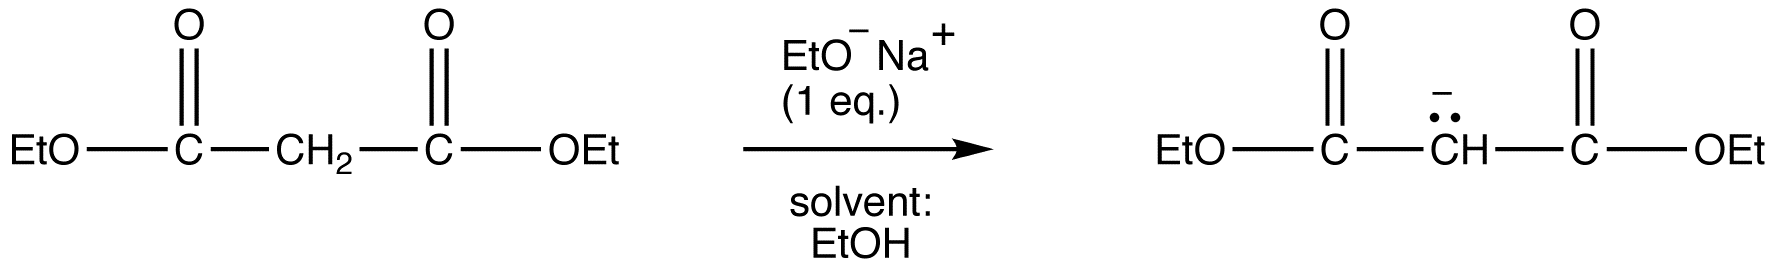 malonicestersynthesis12.png